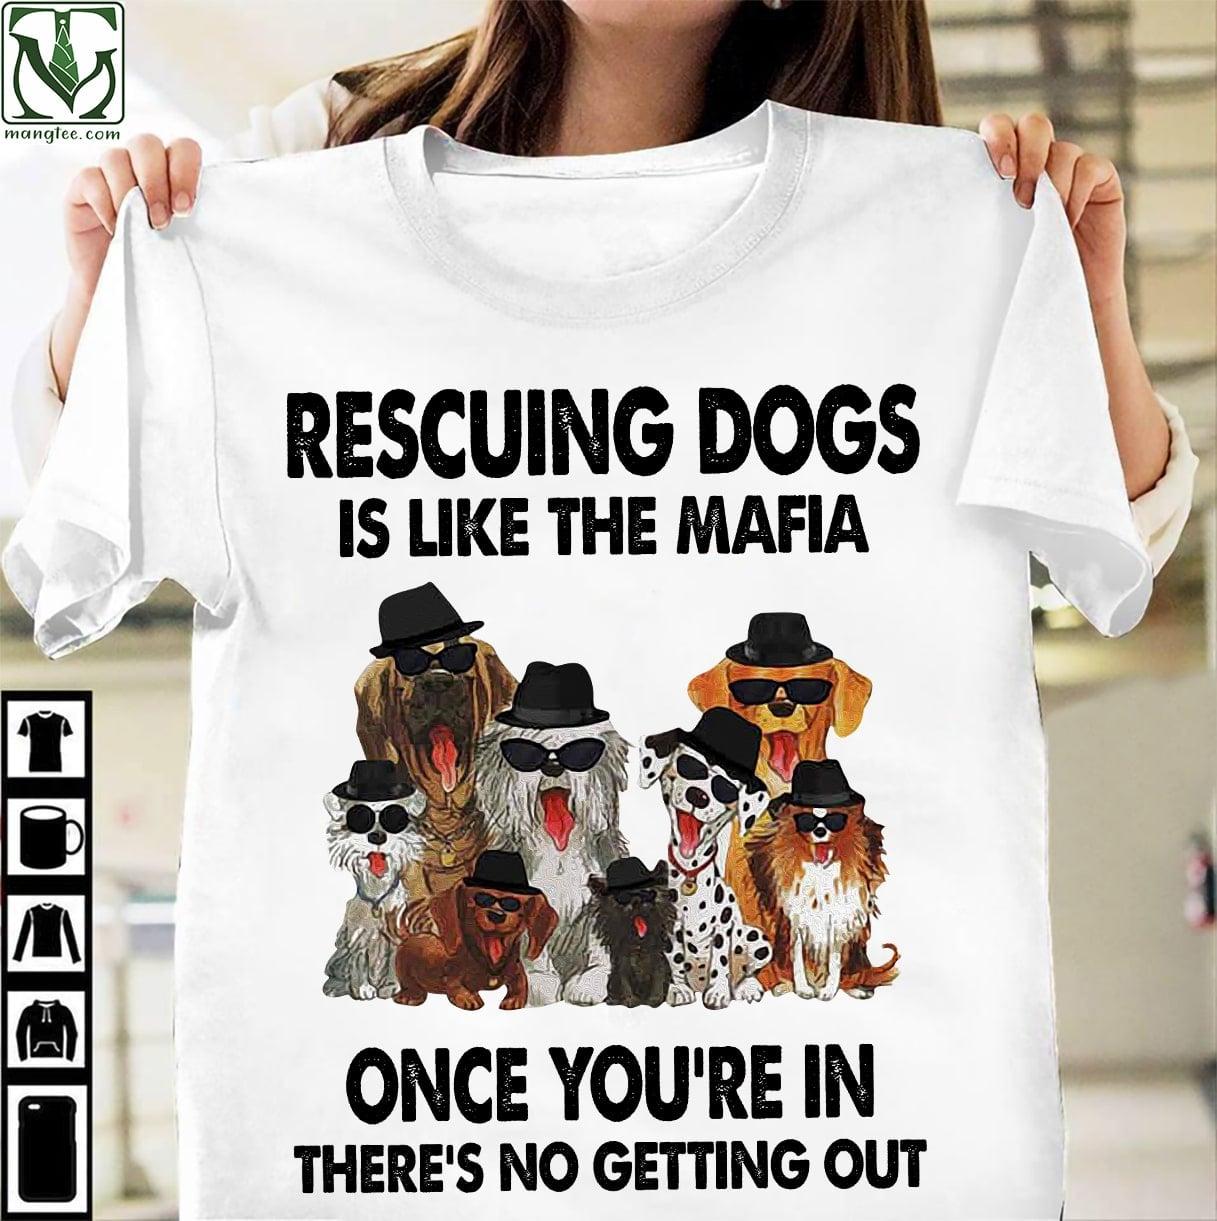 Rescuing dogs is like the mafia once you're in there's no getting out - Mafia dog, gift for dog lover